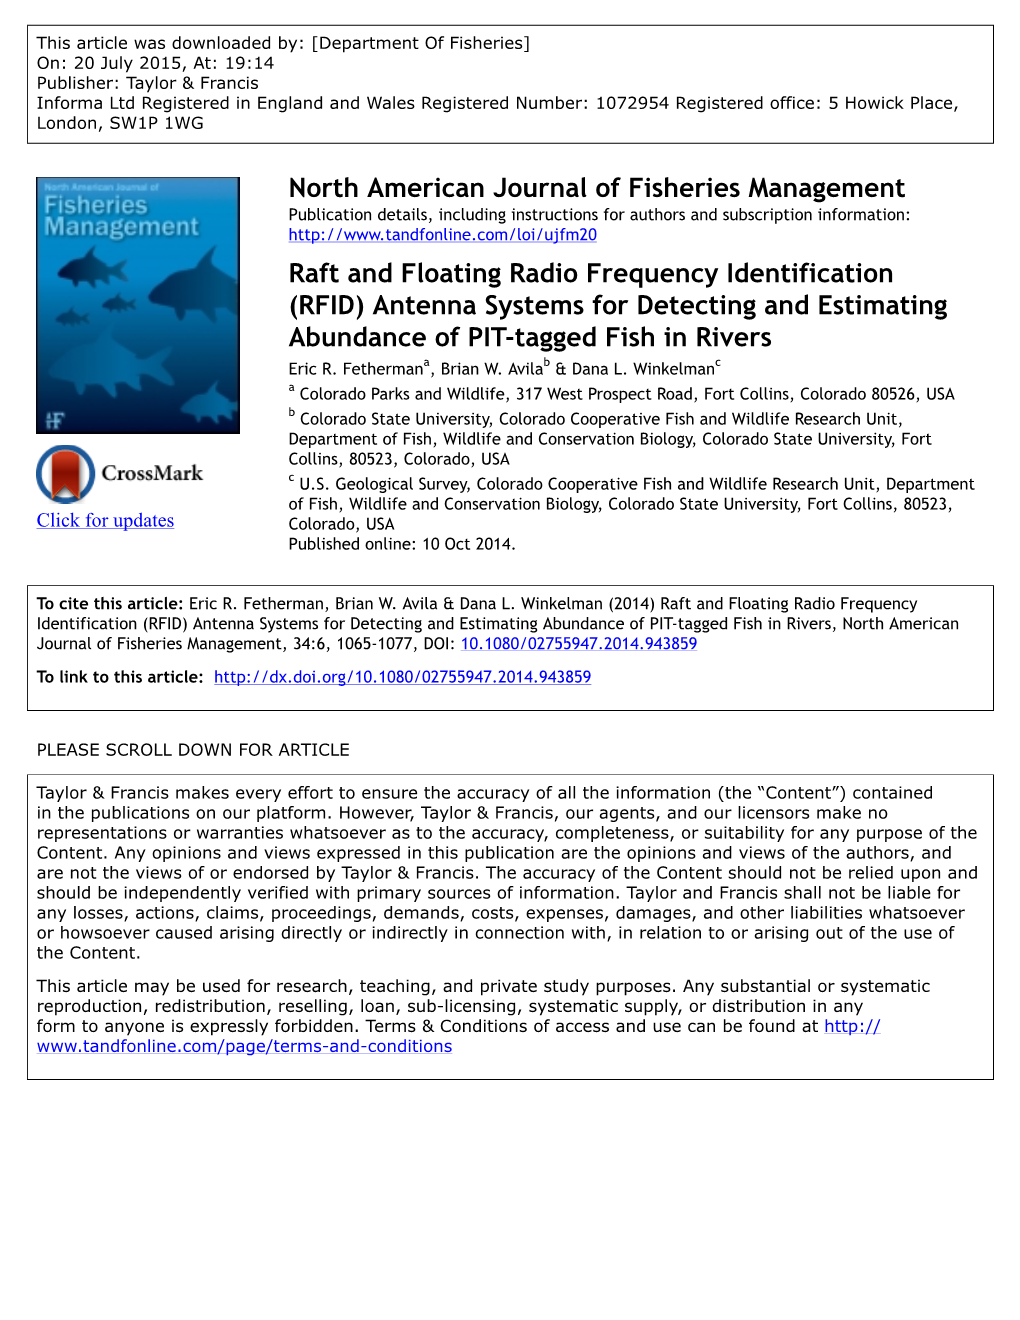 North American Journal of Fisheries Management Raft and Floating